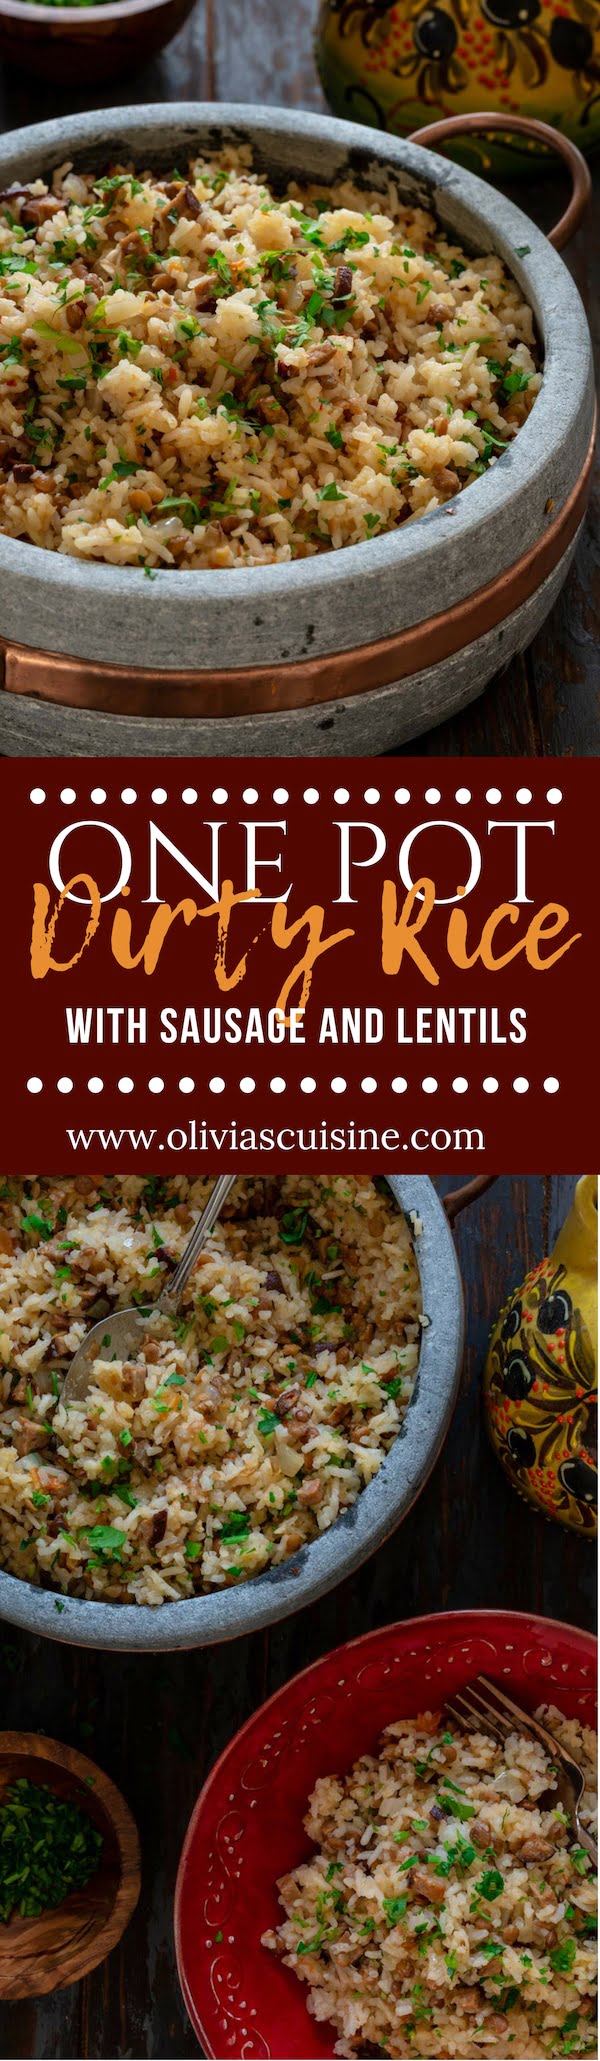 A collage of Brazilian Dirty Rice with sausage and lentils photos.